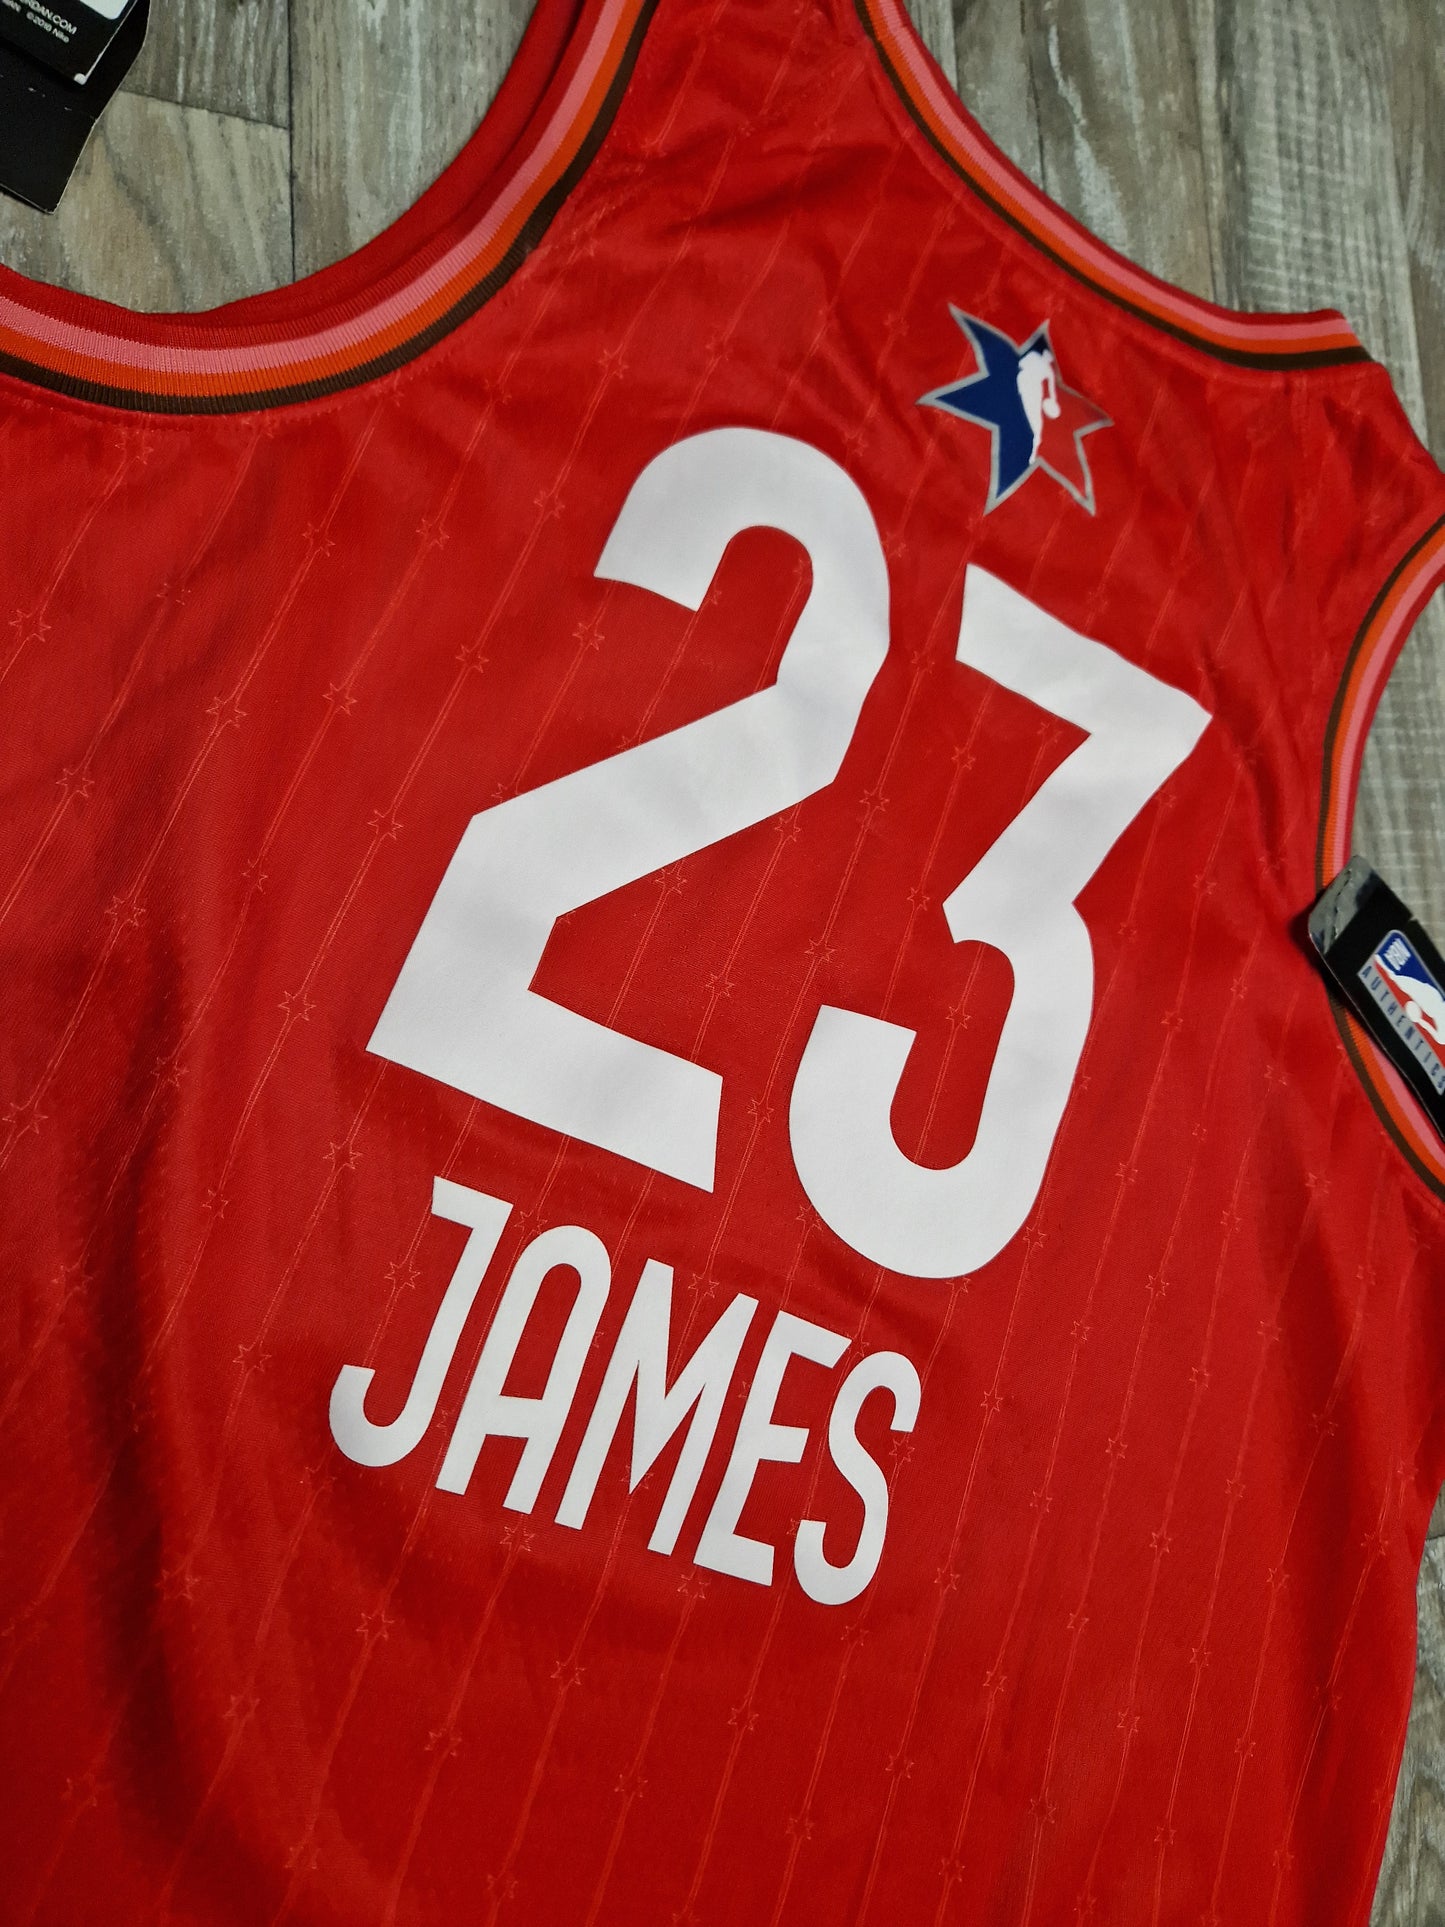 Lebron James NBA All Star 2021 Jersey Size Large